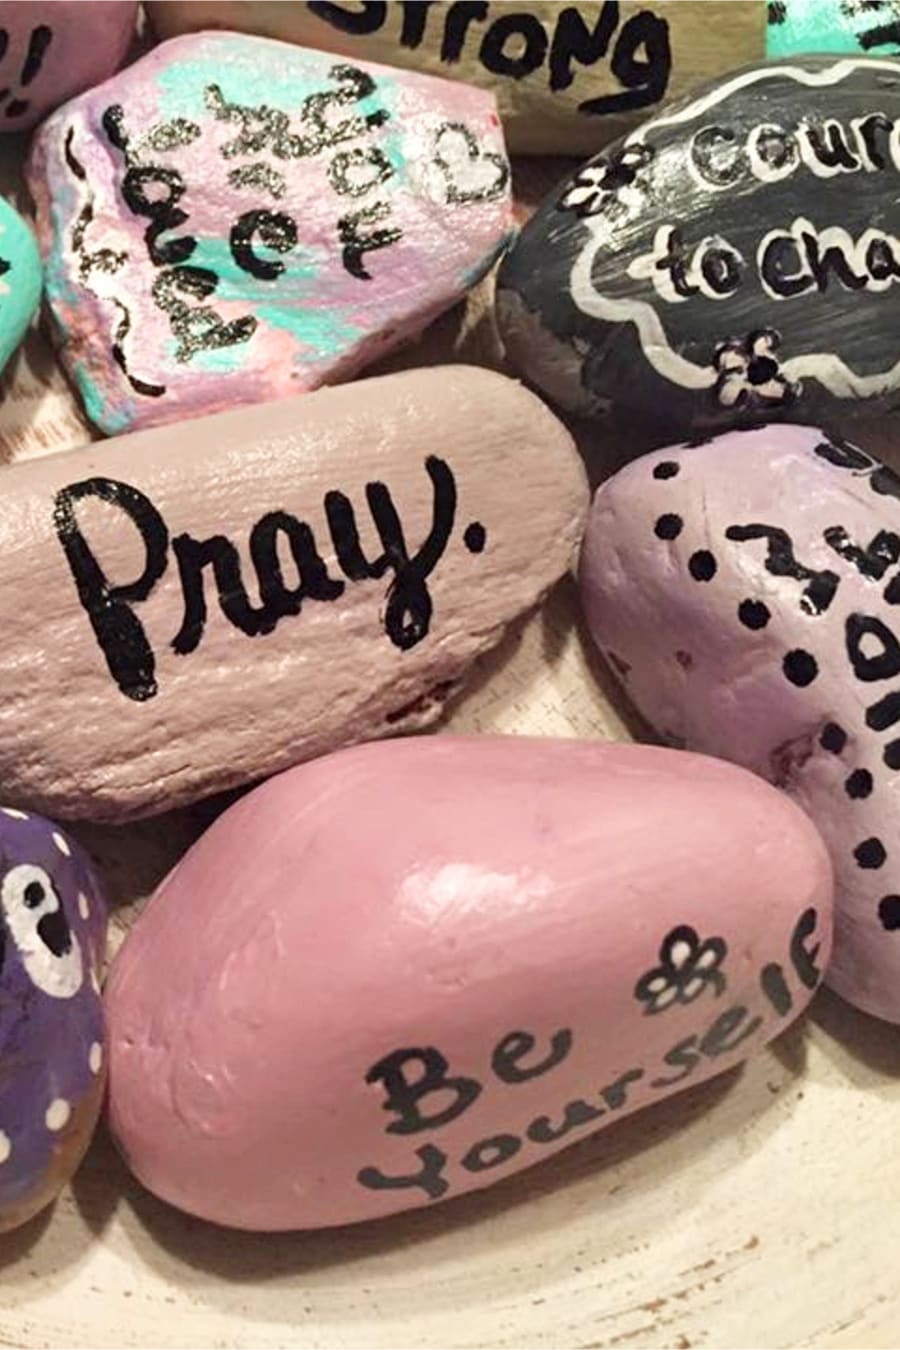 crafts to do when your bored with a friend - simple rock painting ideas